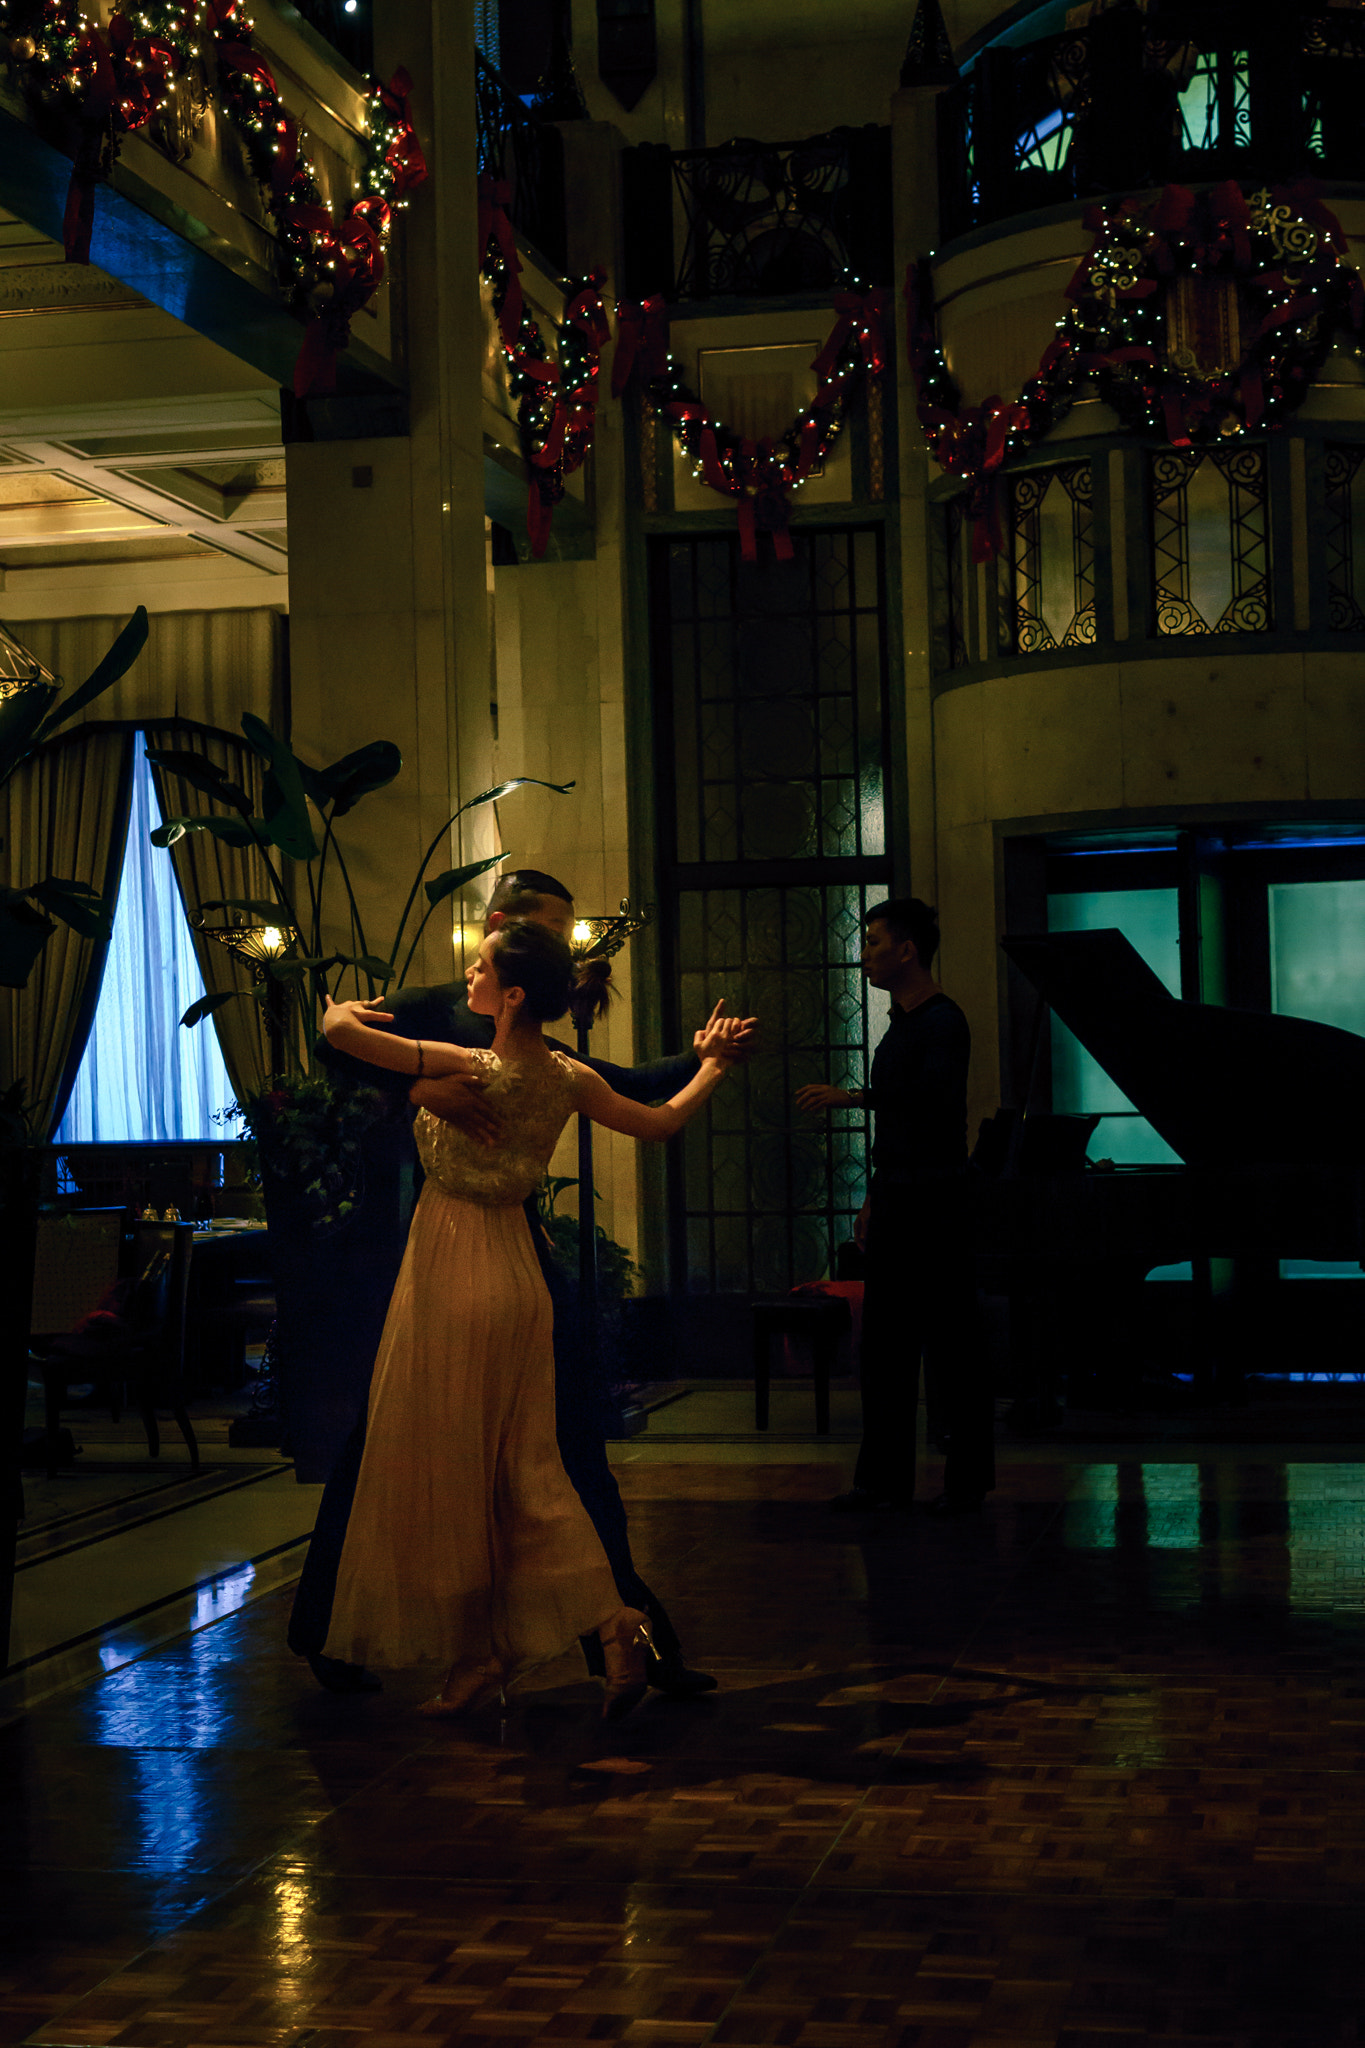 Sony a6000 sample photo. Waltz at the bund photography